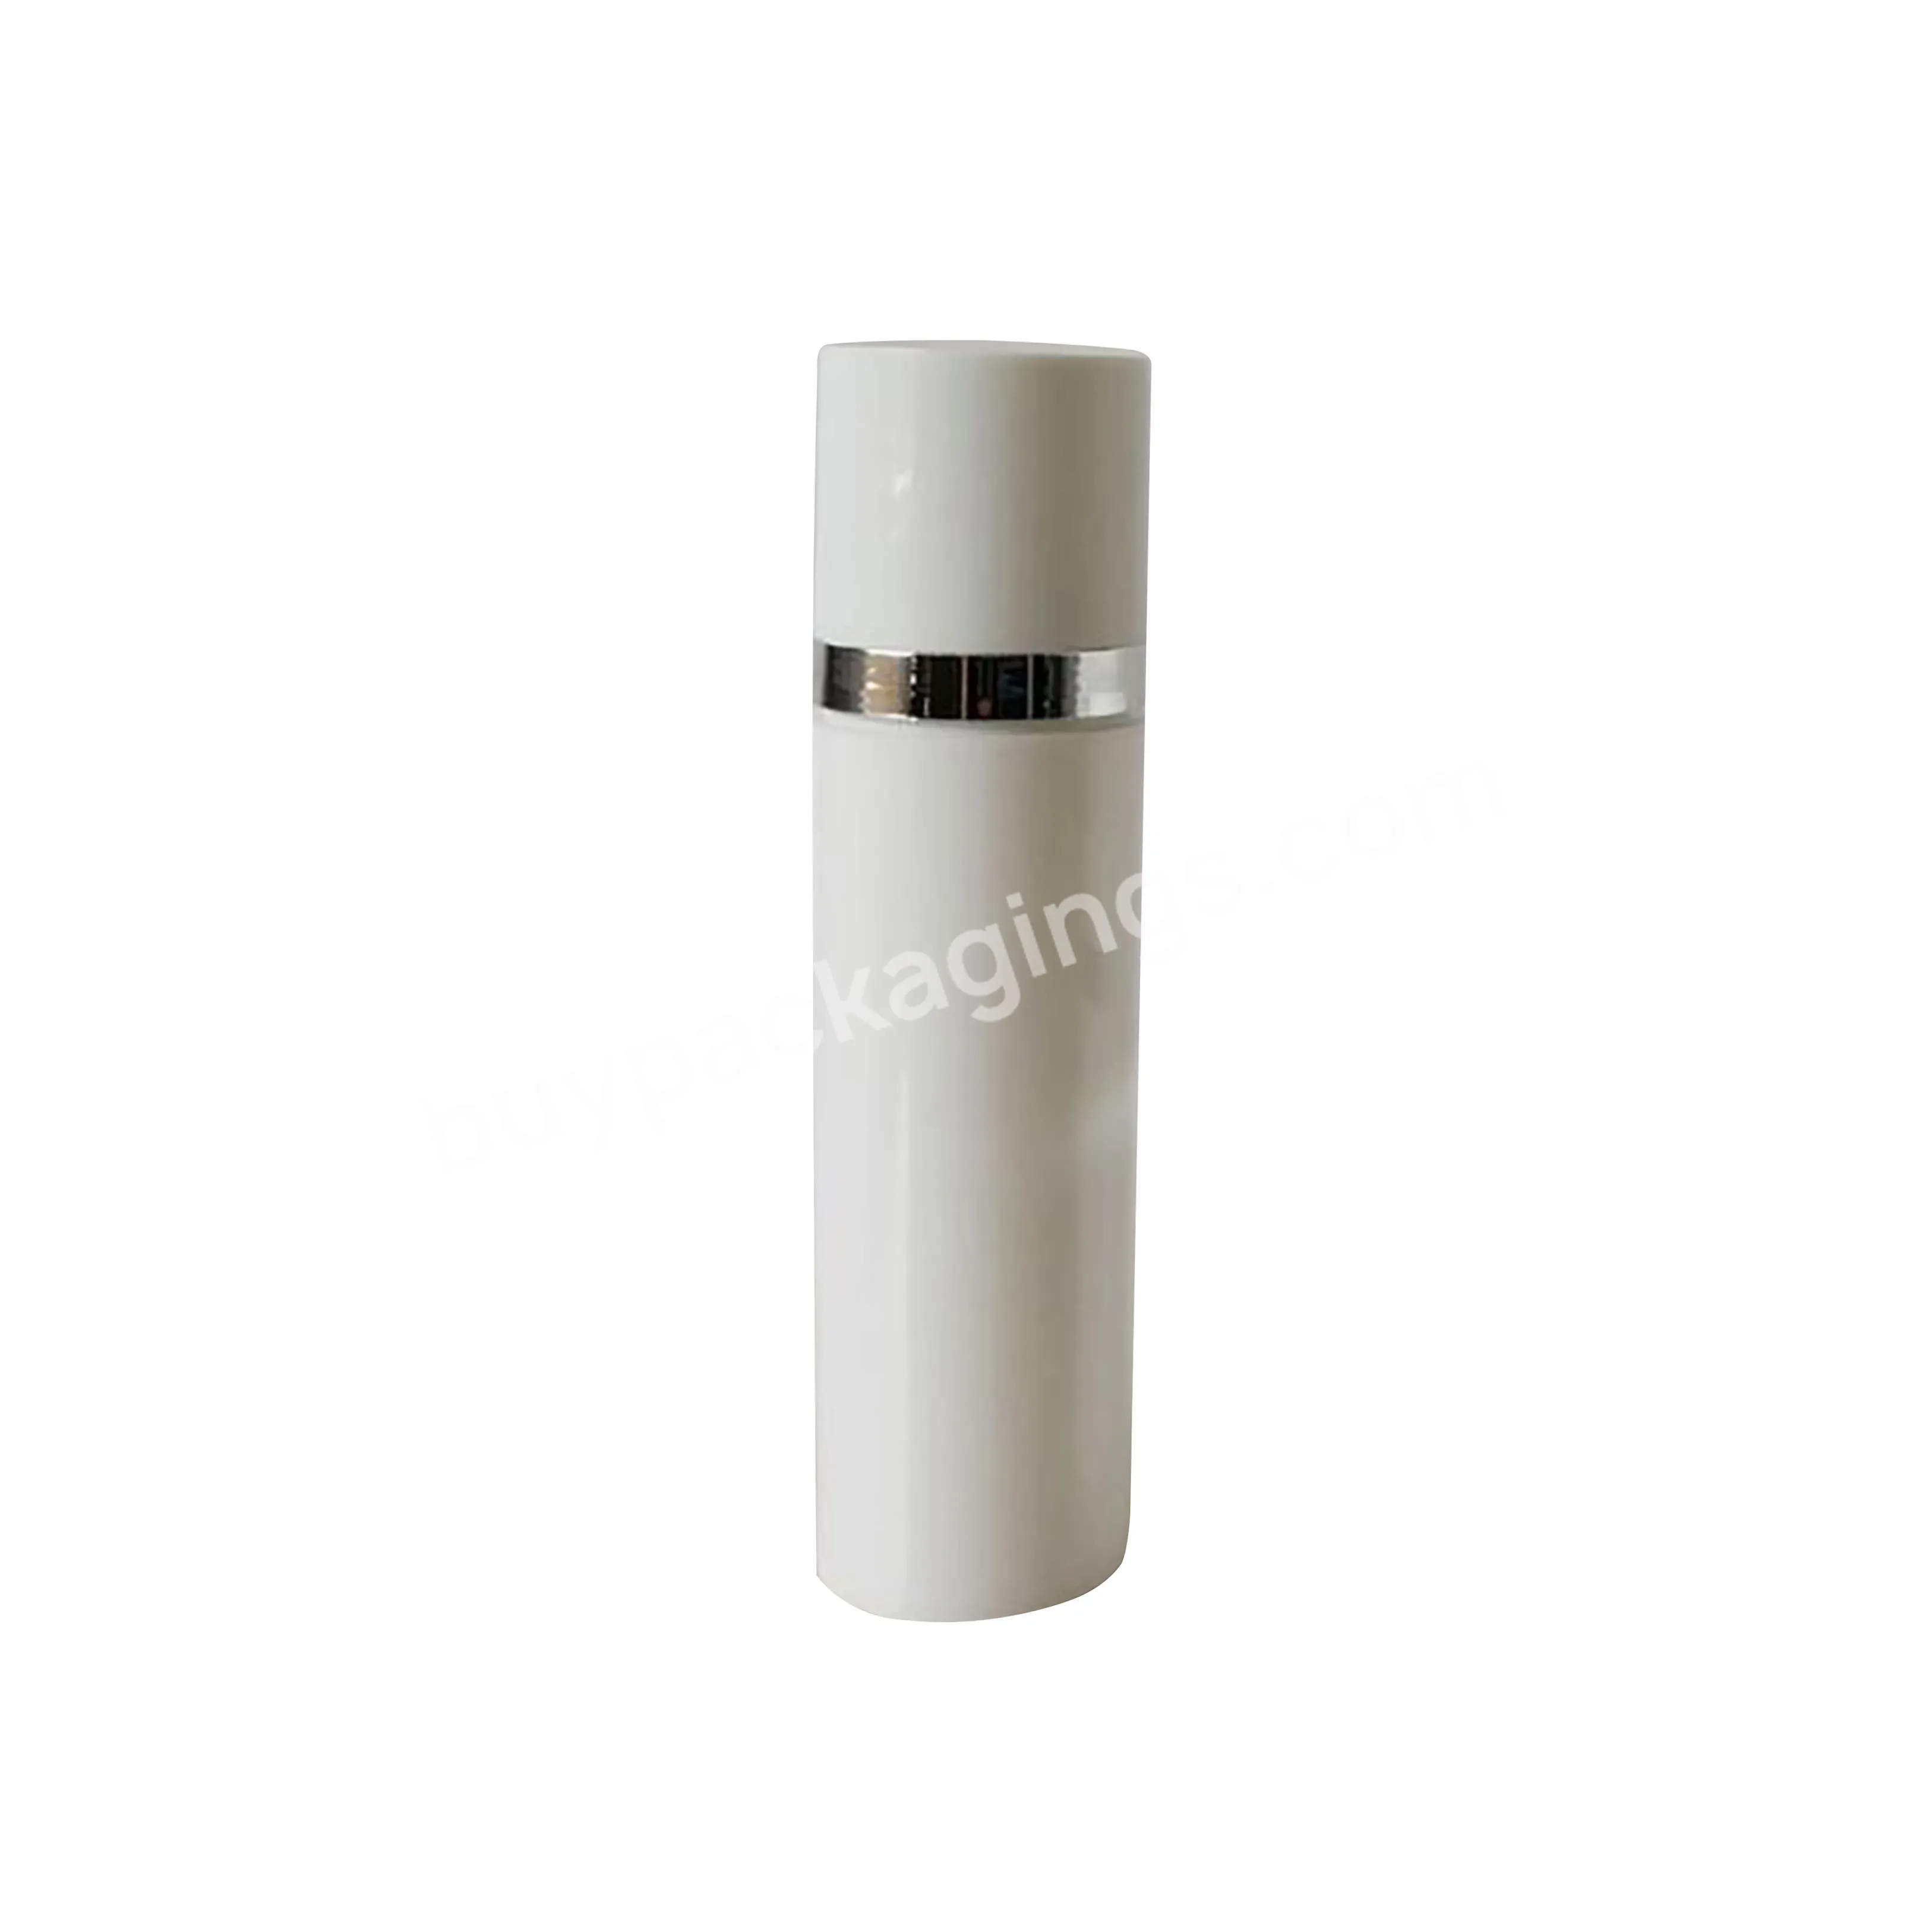 30ml 50ml 100ml Wholesale White Pp Snap Vacuum Bottle Cosmetic Squeeze Press Airless Bottle - Buy 30ml 50ml 100ml Whoelsale White Bottle,Pp Snap Vacuum Bottle,Cosmetic Squeeze Press Airless Bottle.